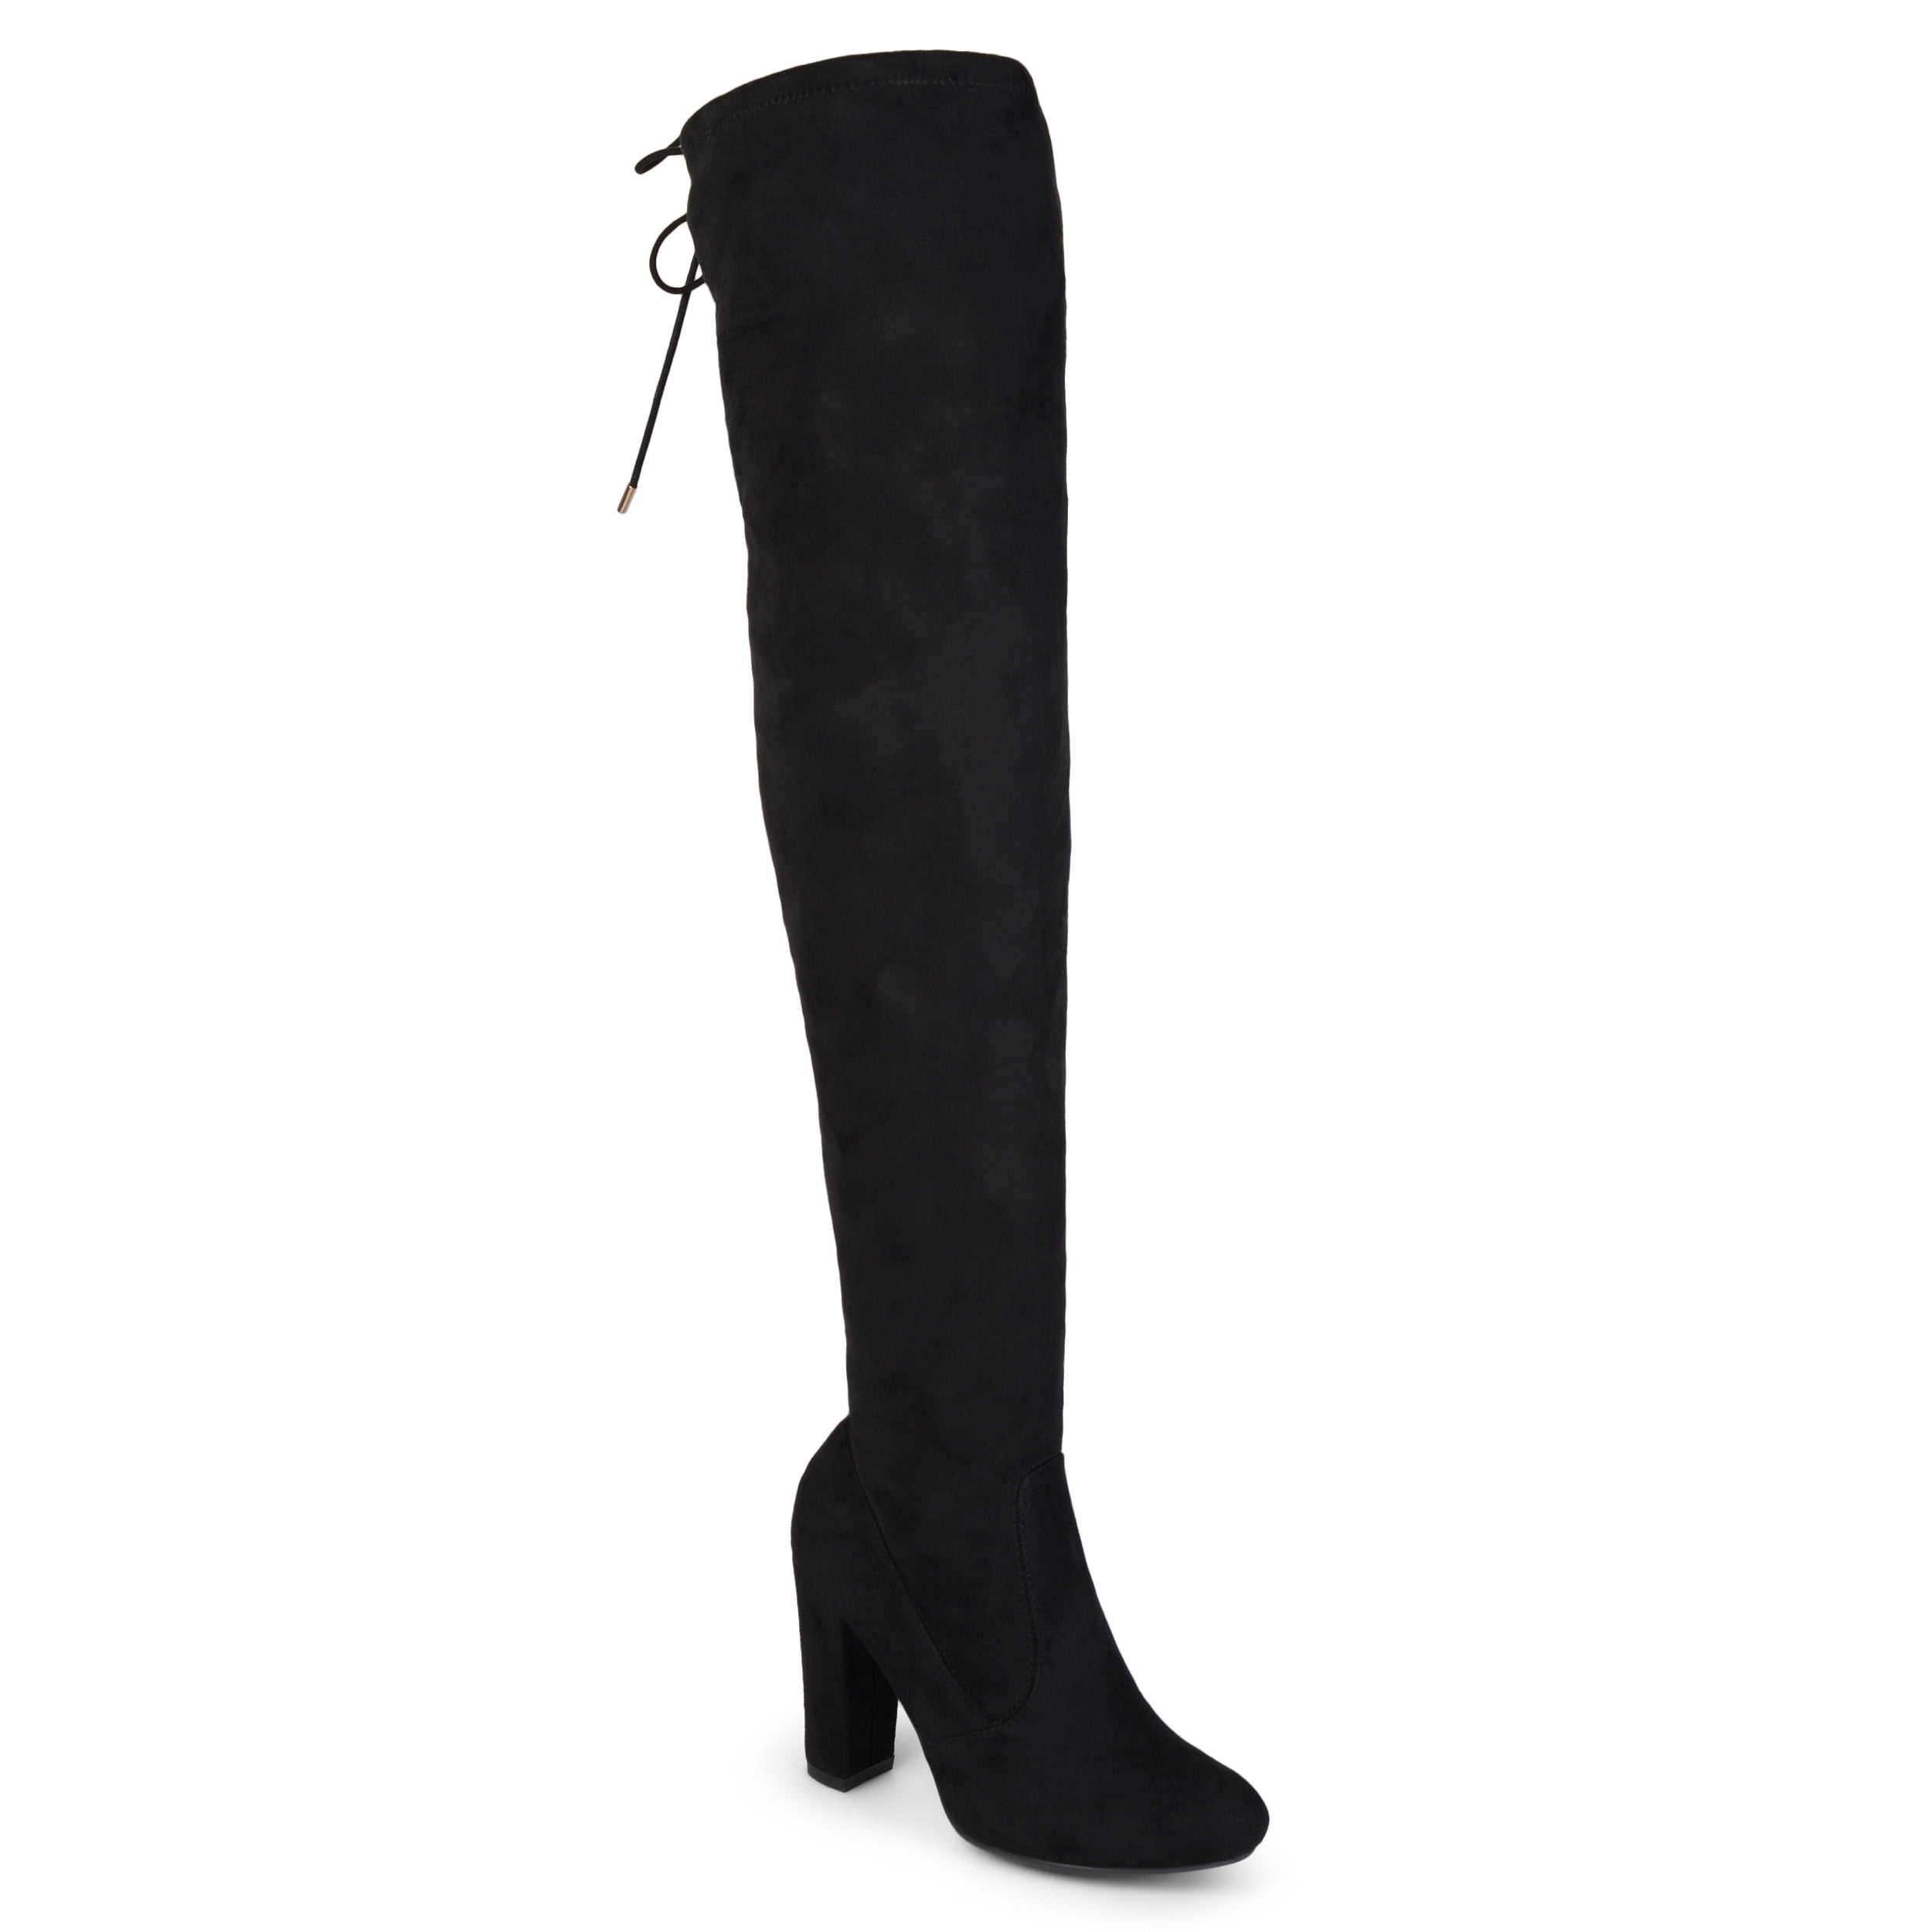 WOMENS LADIES CHUNKY HEEL OVER THE KNEE THIGH HIGH WINTER BOOTS STRETCH WIDE LEG 